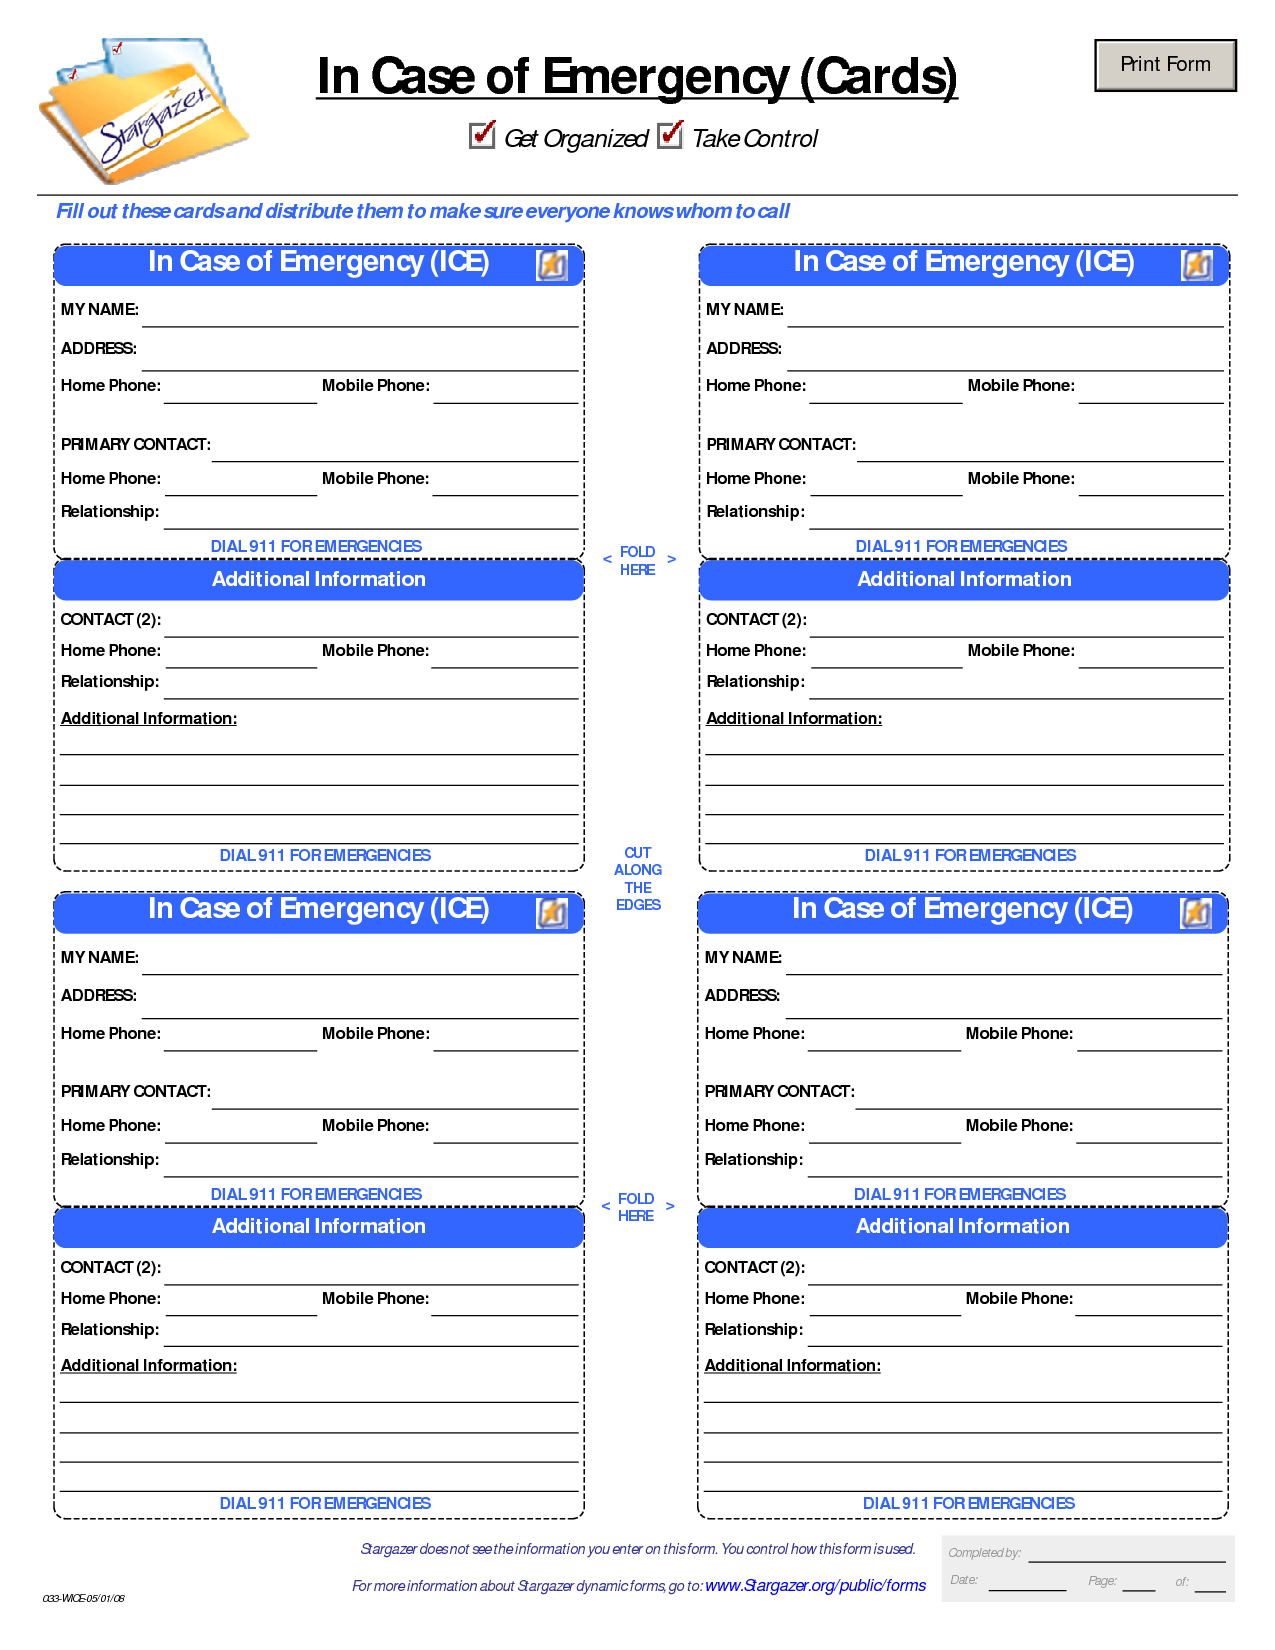 Id Card Template | In Case Of Emergency Cards | School | Id With In Case Of Emergency Card Template